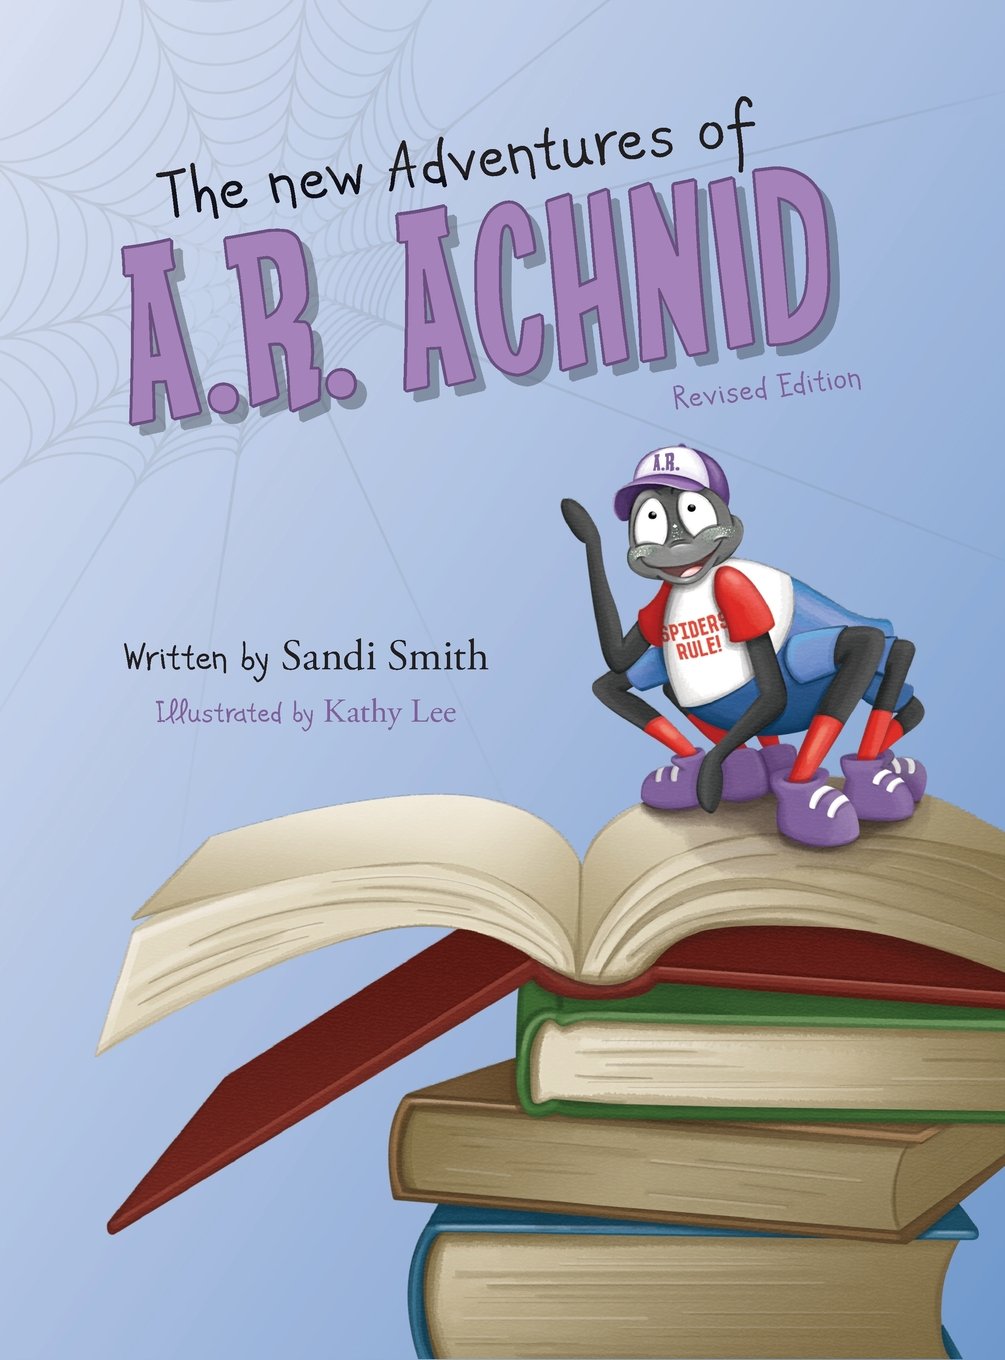 The New Adventures of A.R. Achnid by Sandi Smith